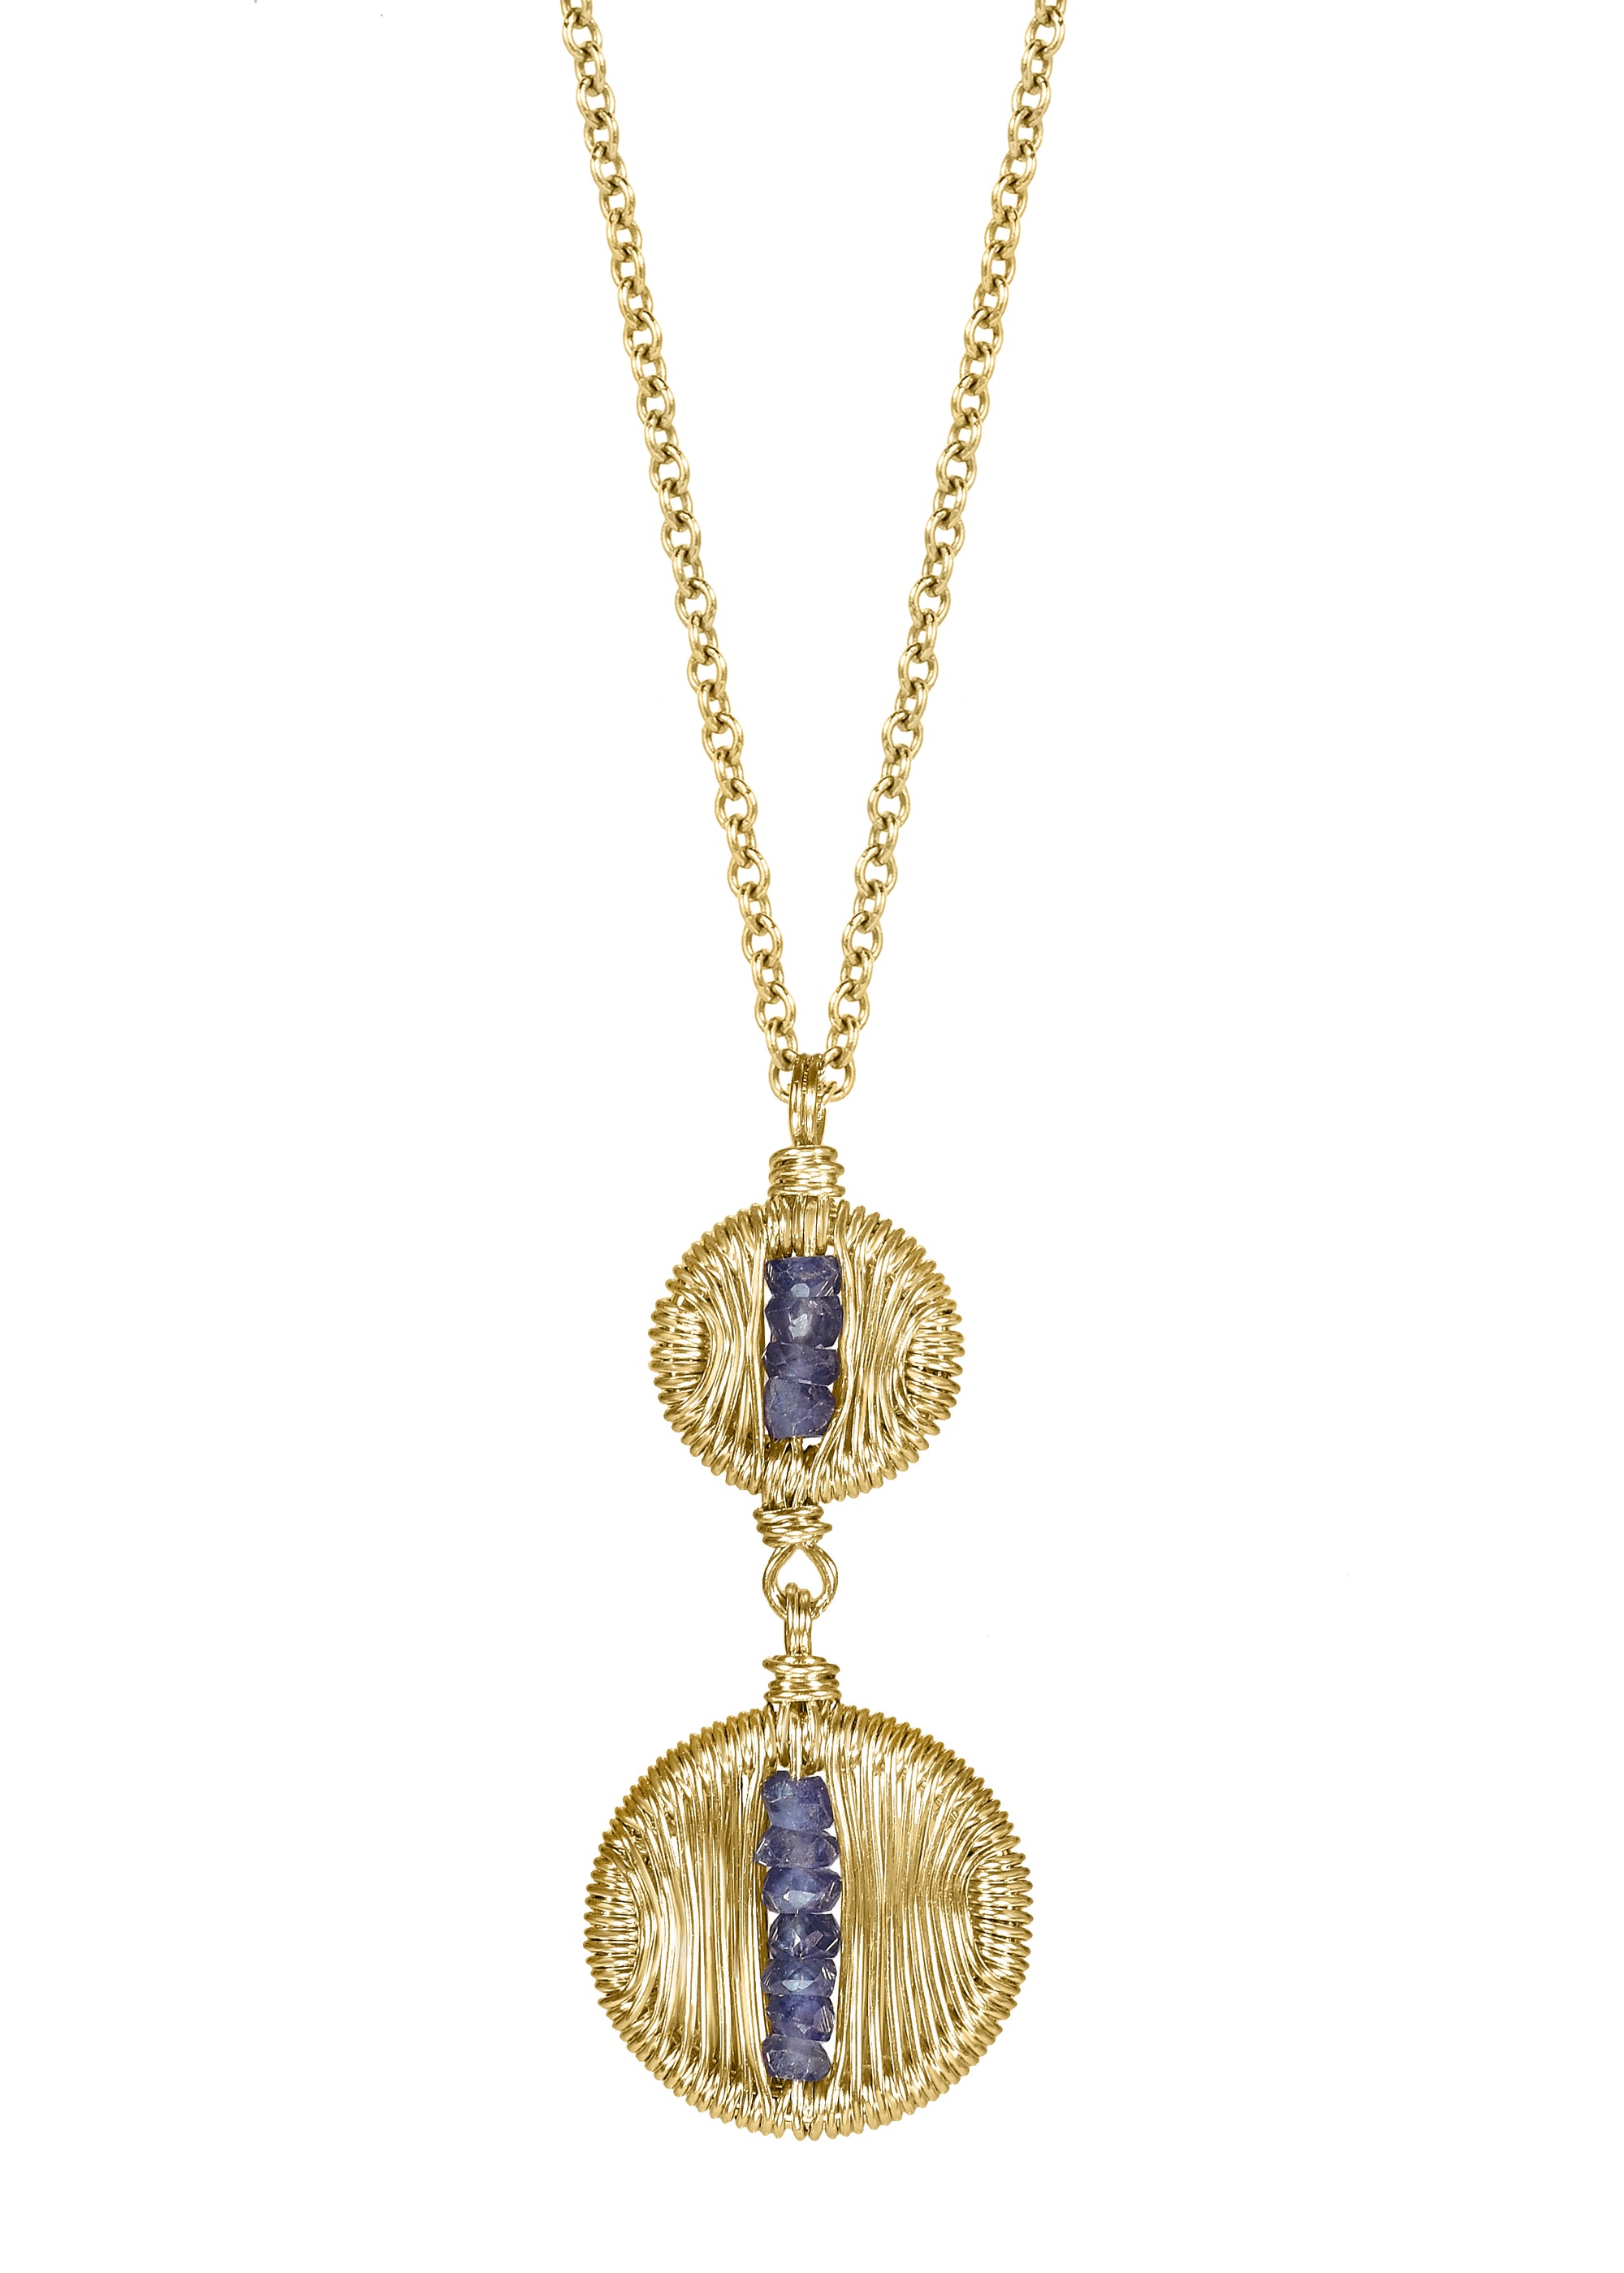 Blue sapphire 14k gold fill Necklace measures 17" in length Pendants measure 1/4" D (top) and 3/8" D (bottom) Handmade in our Los Angeles studio